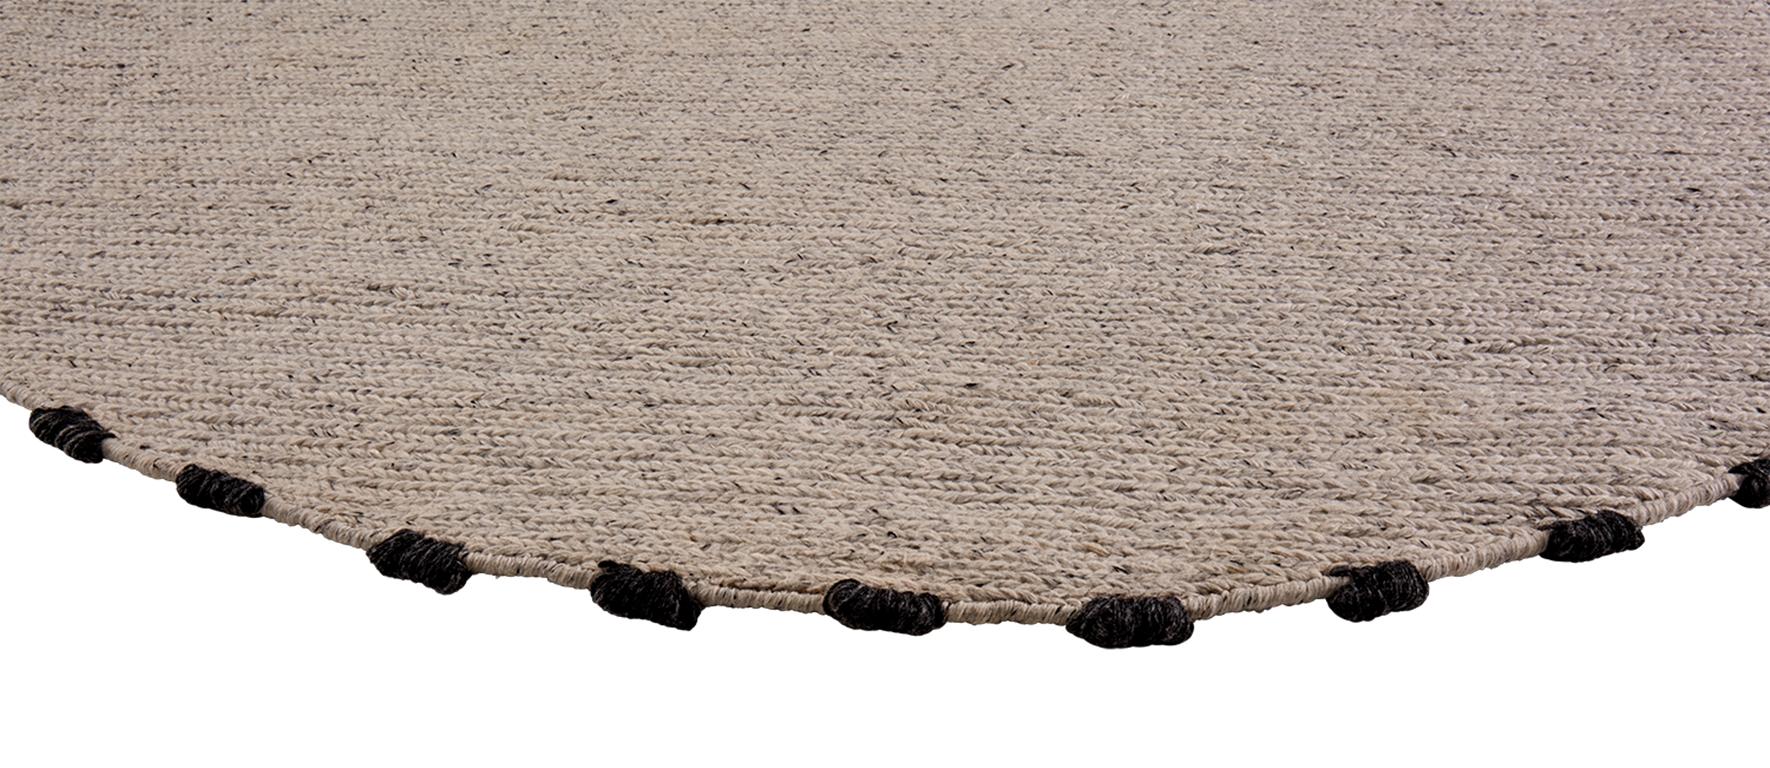 Nepalese Brish' Outdoor Excellence: Hand-Woven Rug in 100% PET, ⌀ 200 cm For Sale